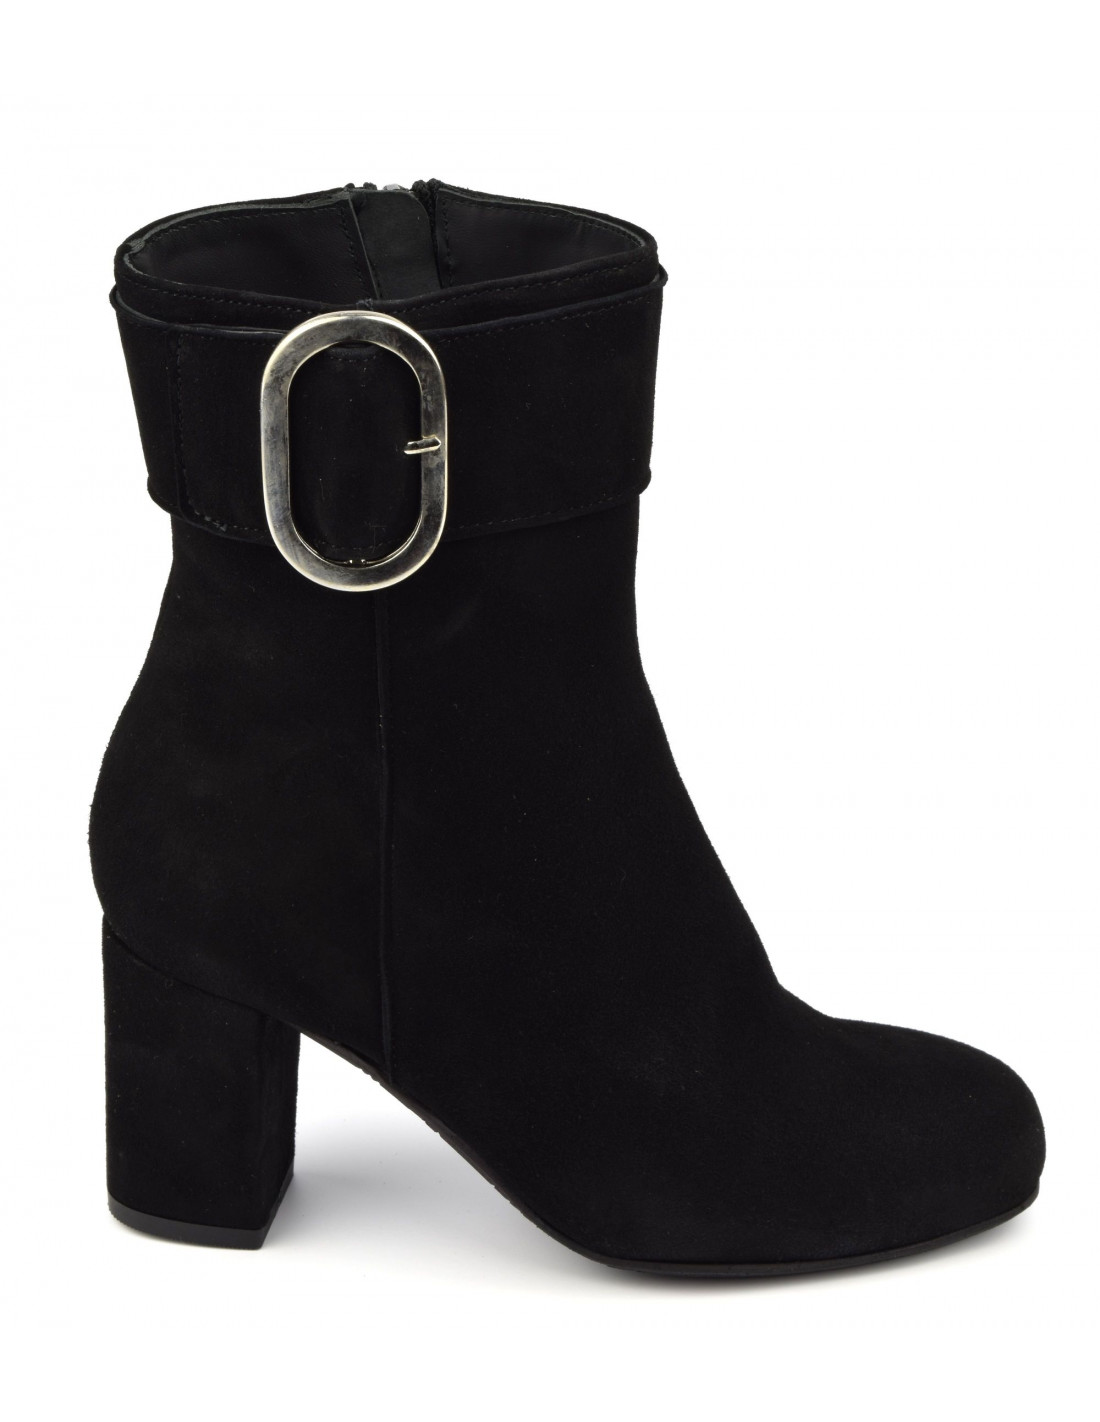 black ankle boots small heel